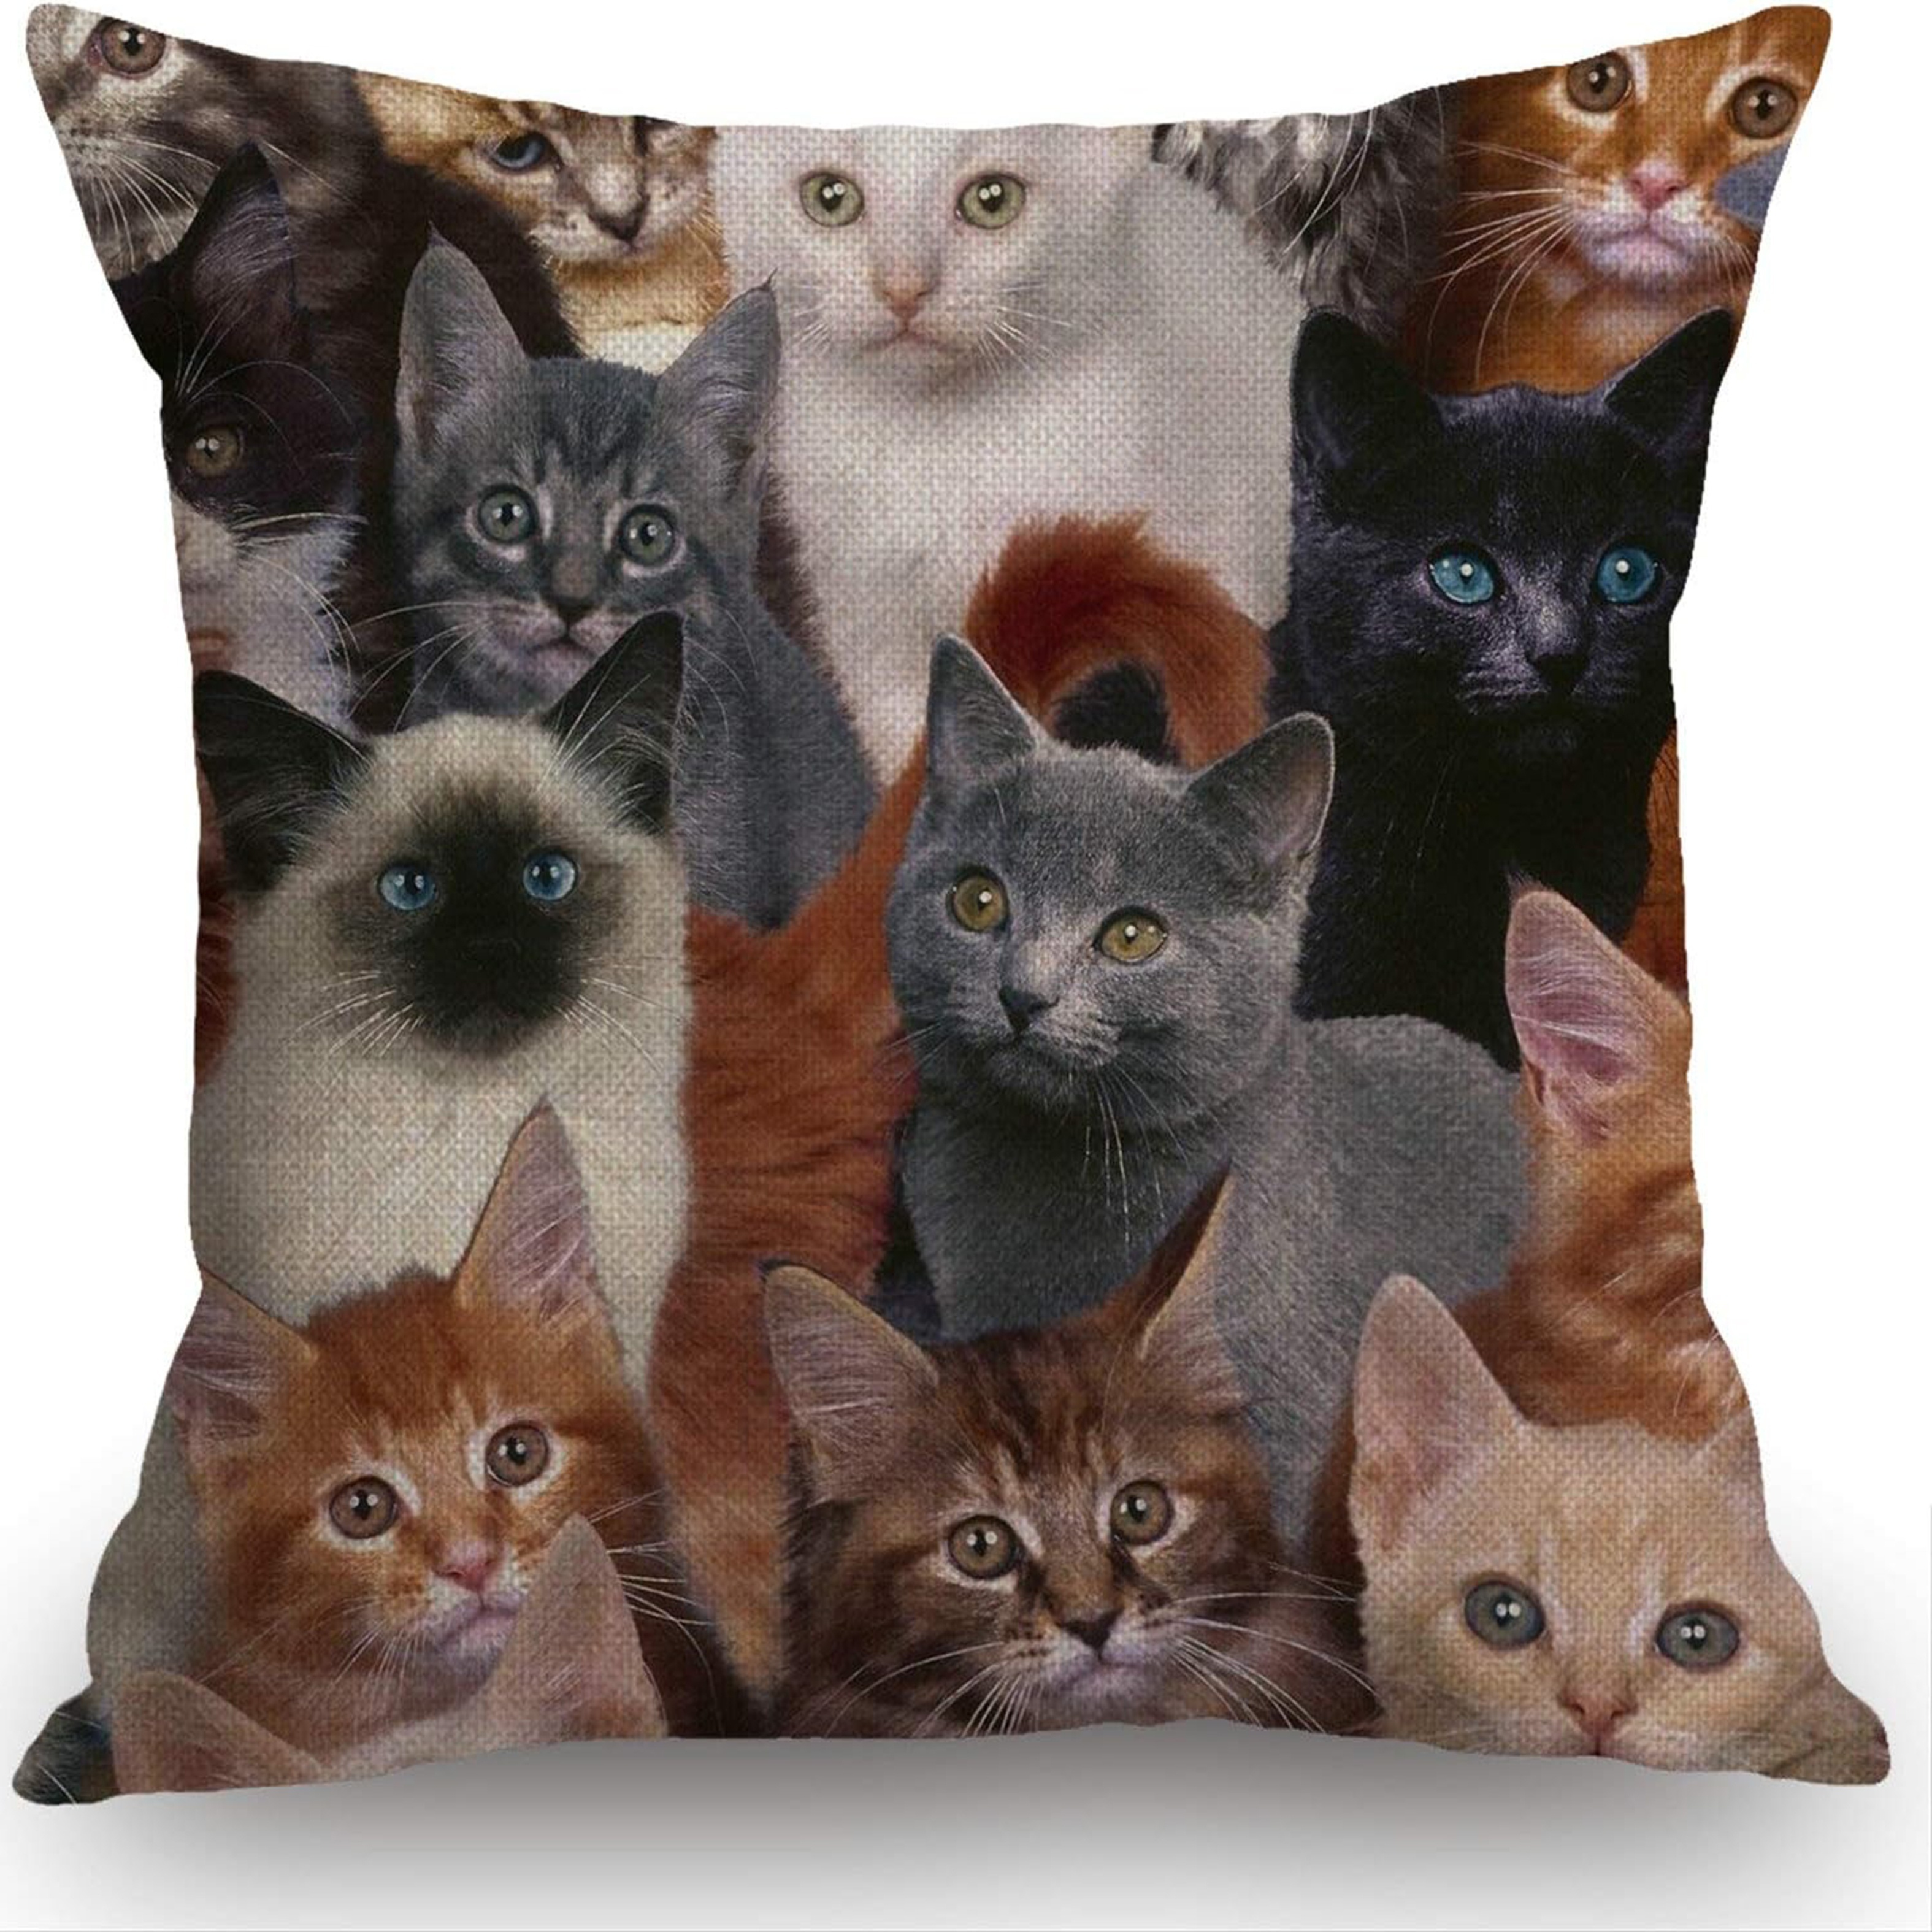 

Chic Cat-themed Linen Throw Pillow Cover - Decorative Cushion Case For Sofa, Bedroom & Living Room - Machine Washable, Zip Closure - Available In 16x16, 18x18, 20x20 Inches - No Insert